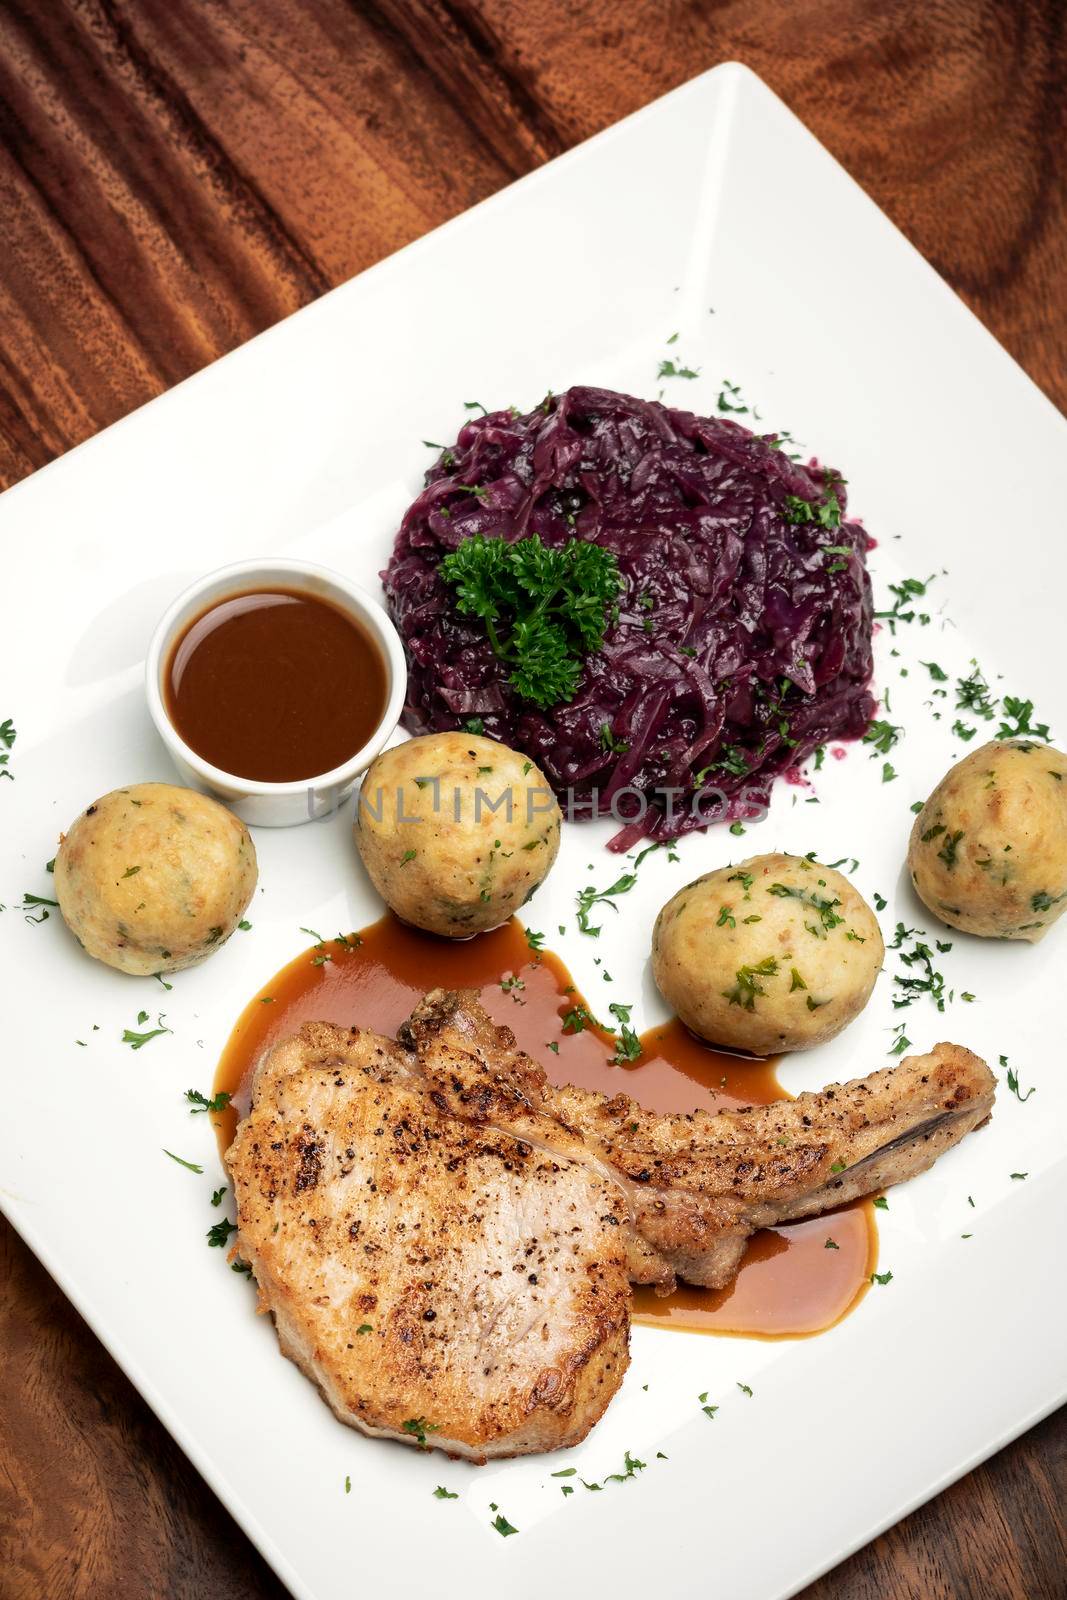 german style grilled pork chop with bread dumplings and red cabbage traditional meal on wood table